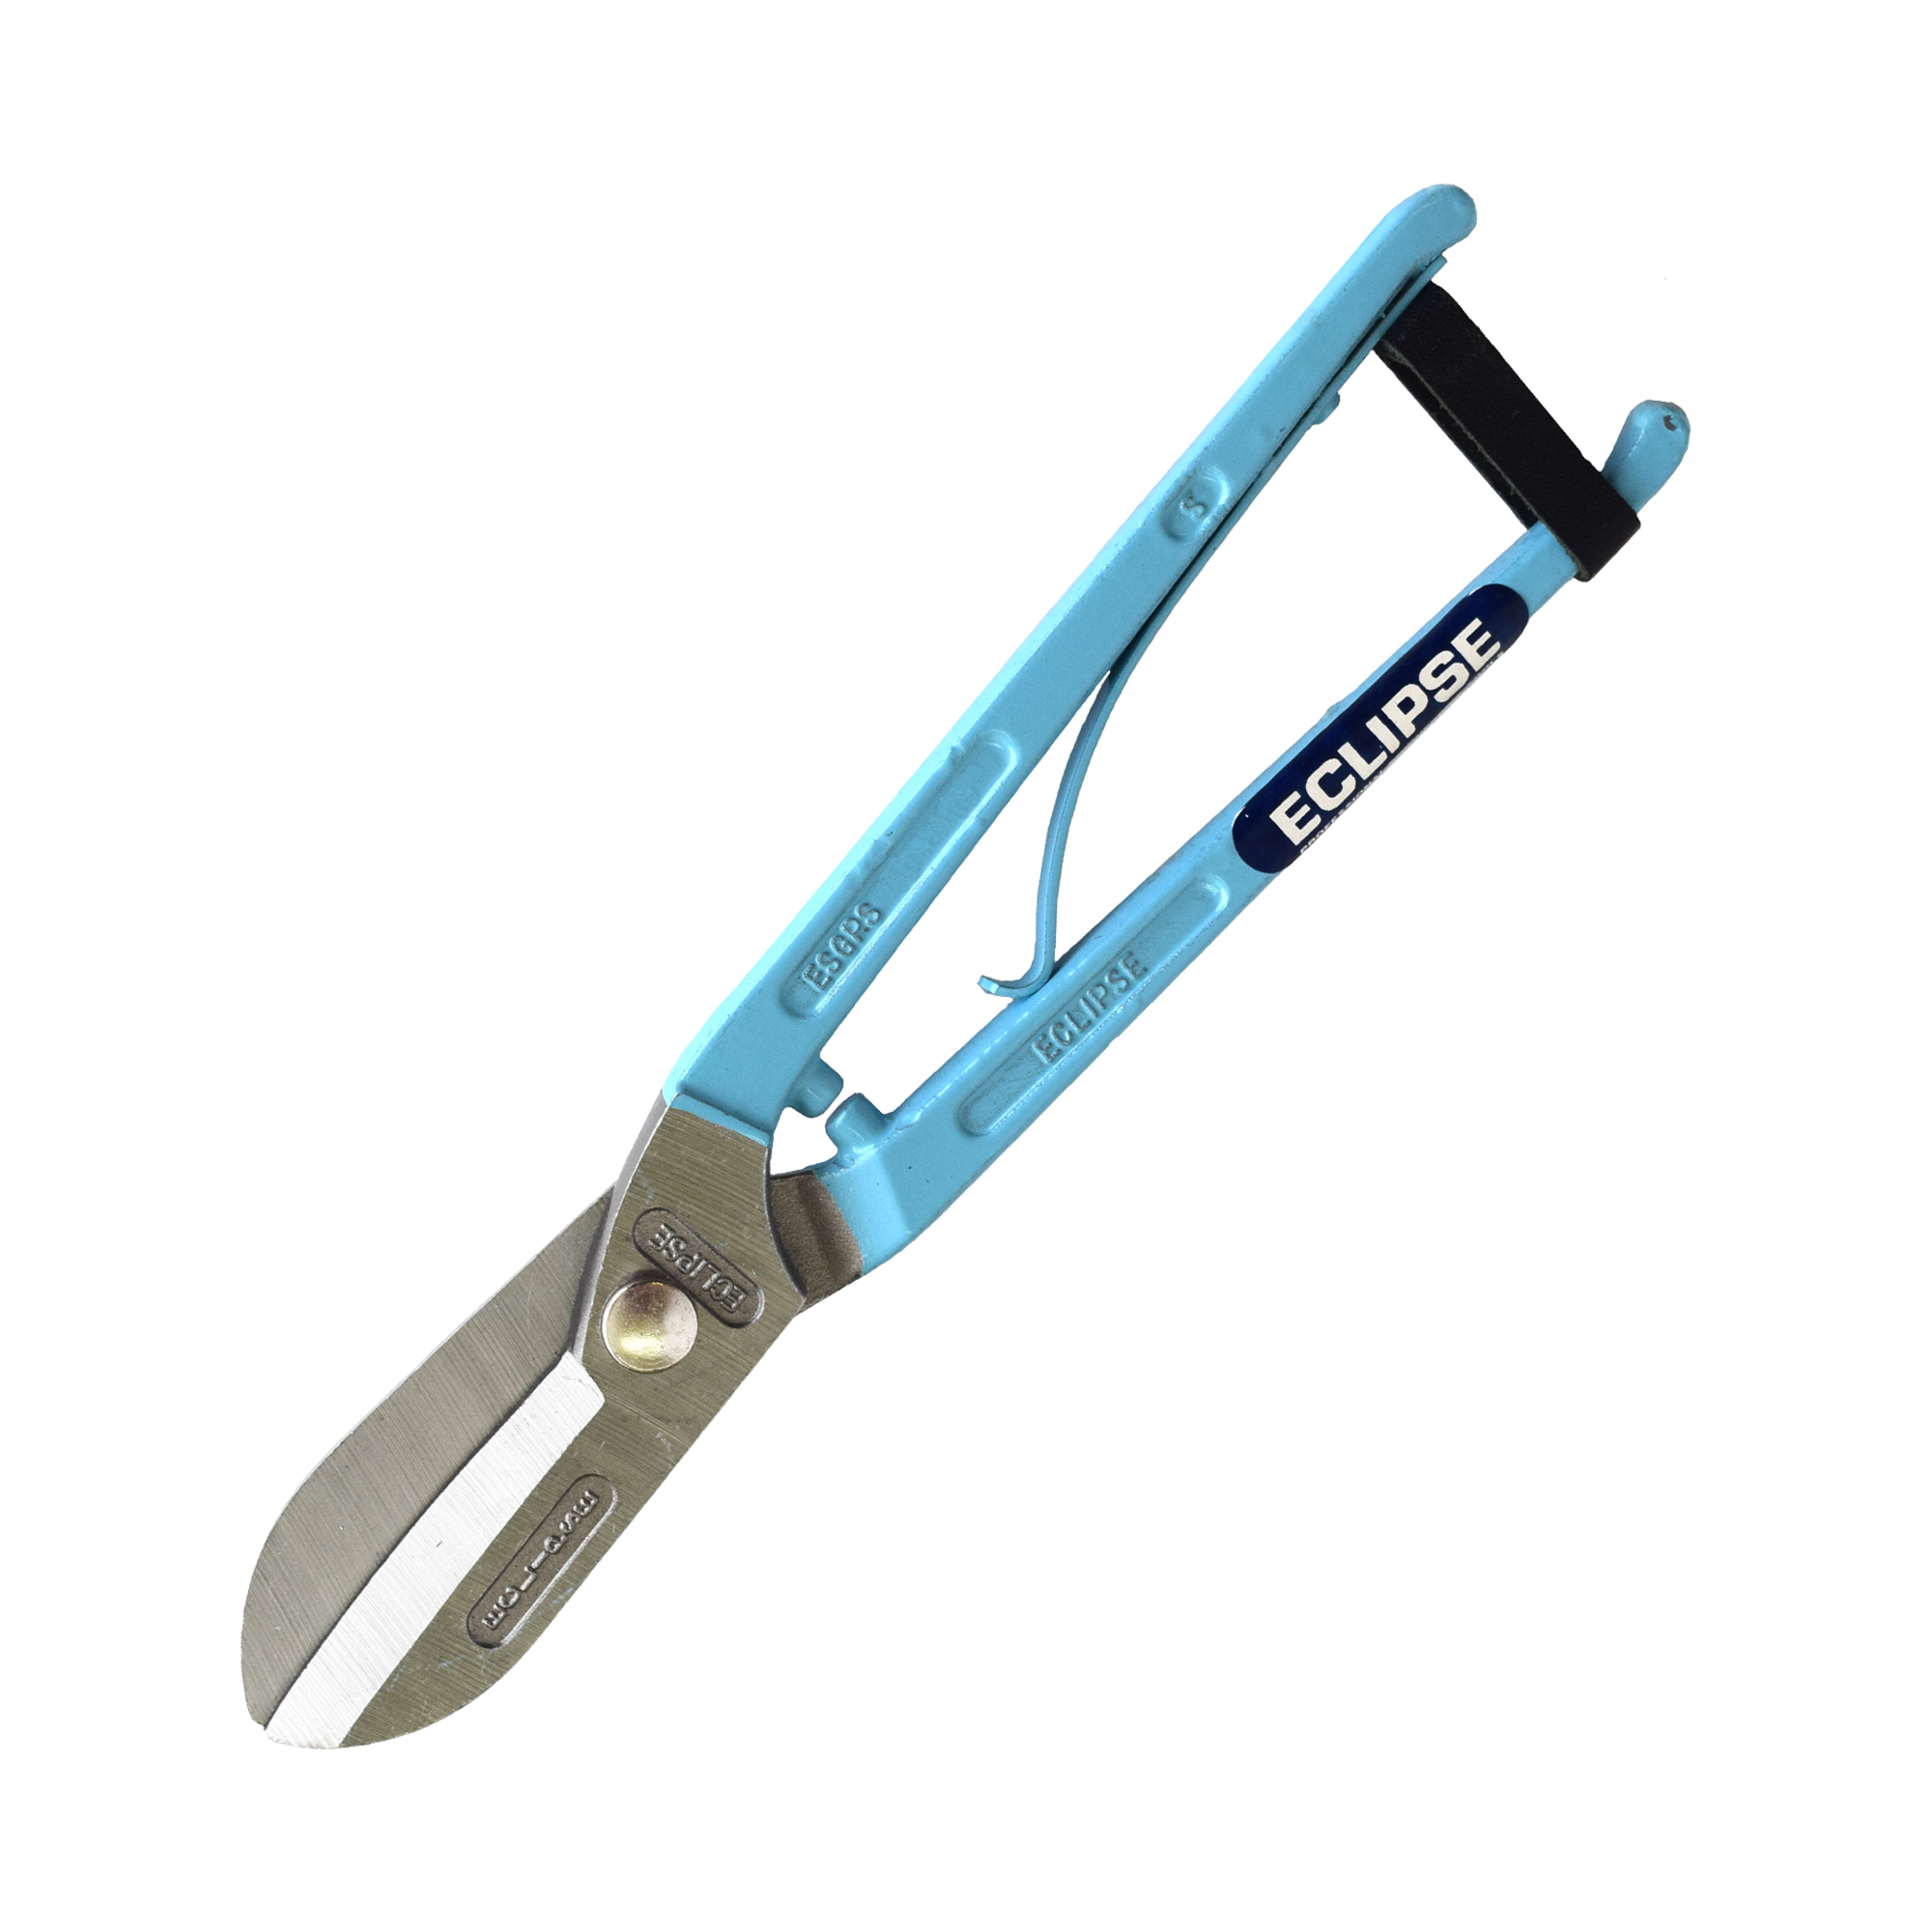 General Purpose Snip, Spring handle by Eclipse